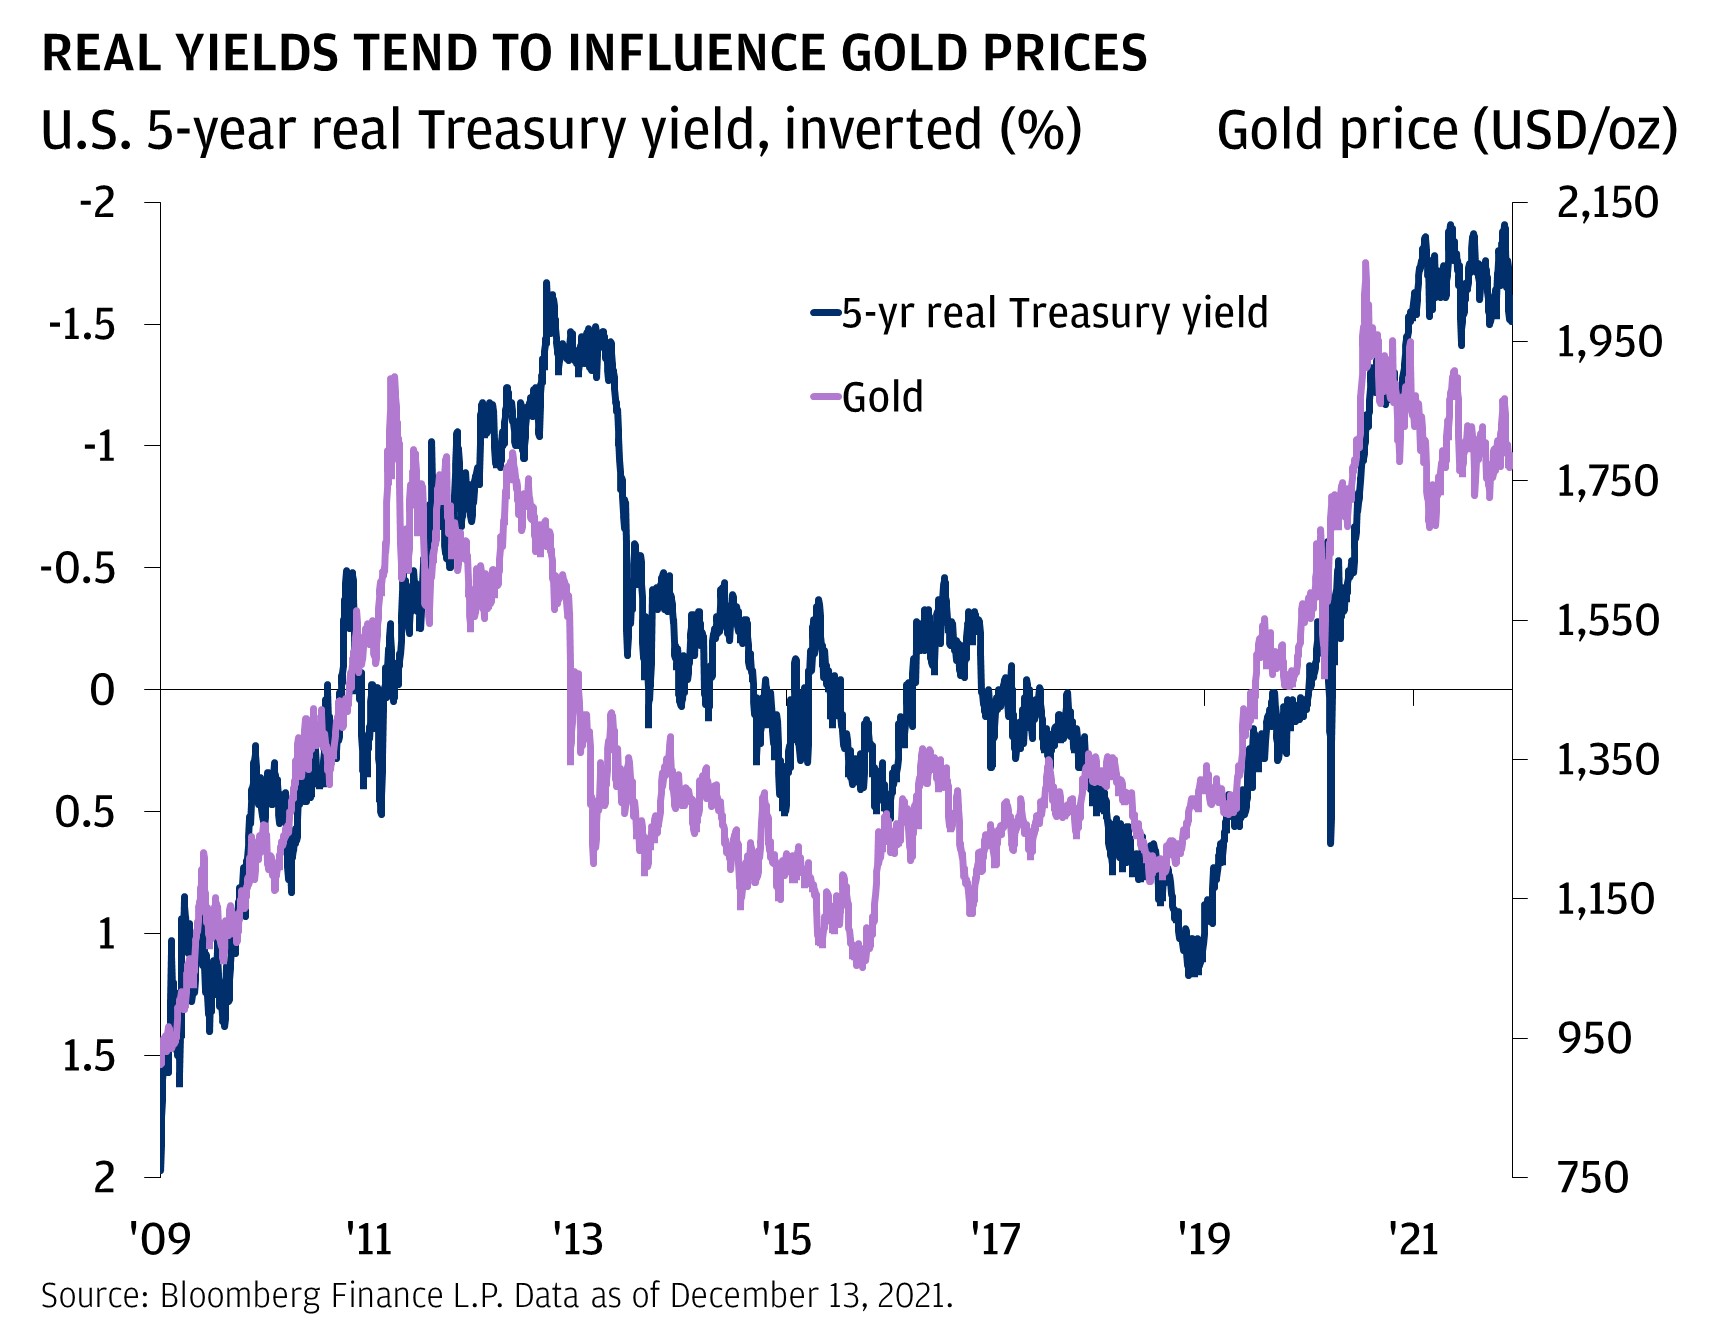 Real yields tend to influence gold prices